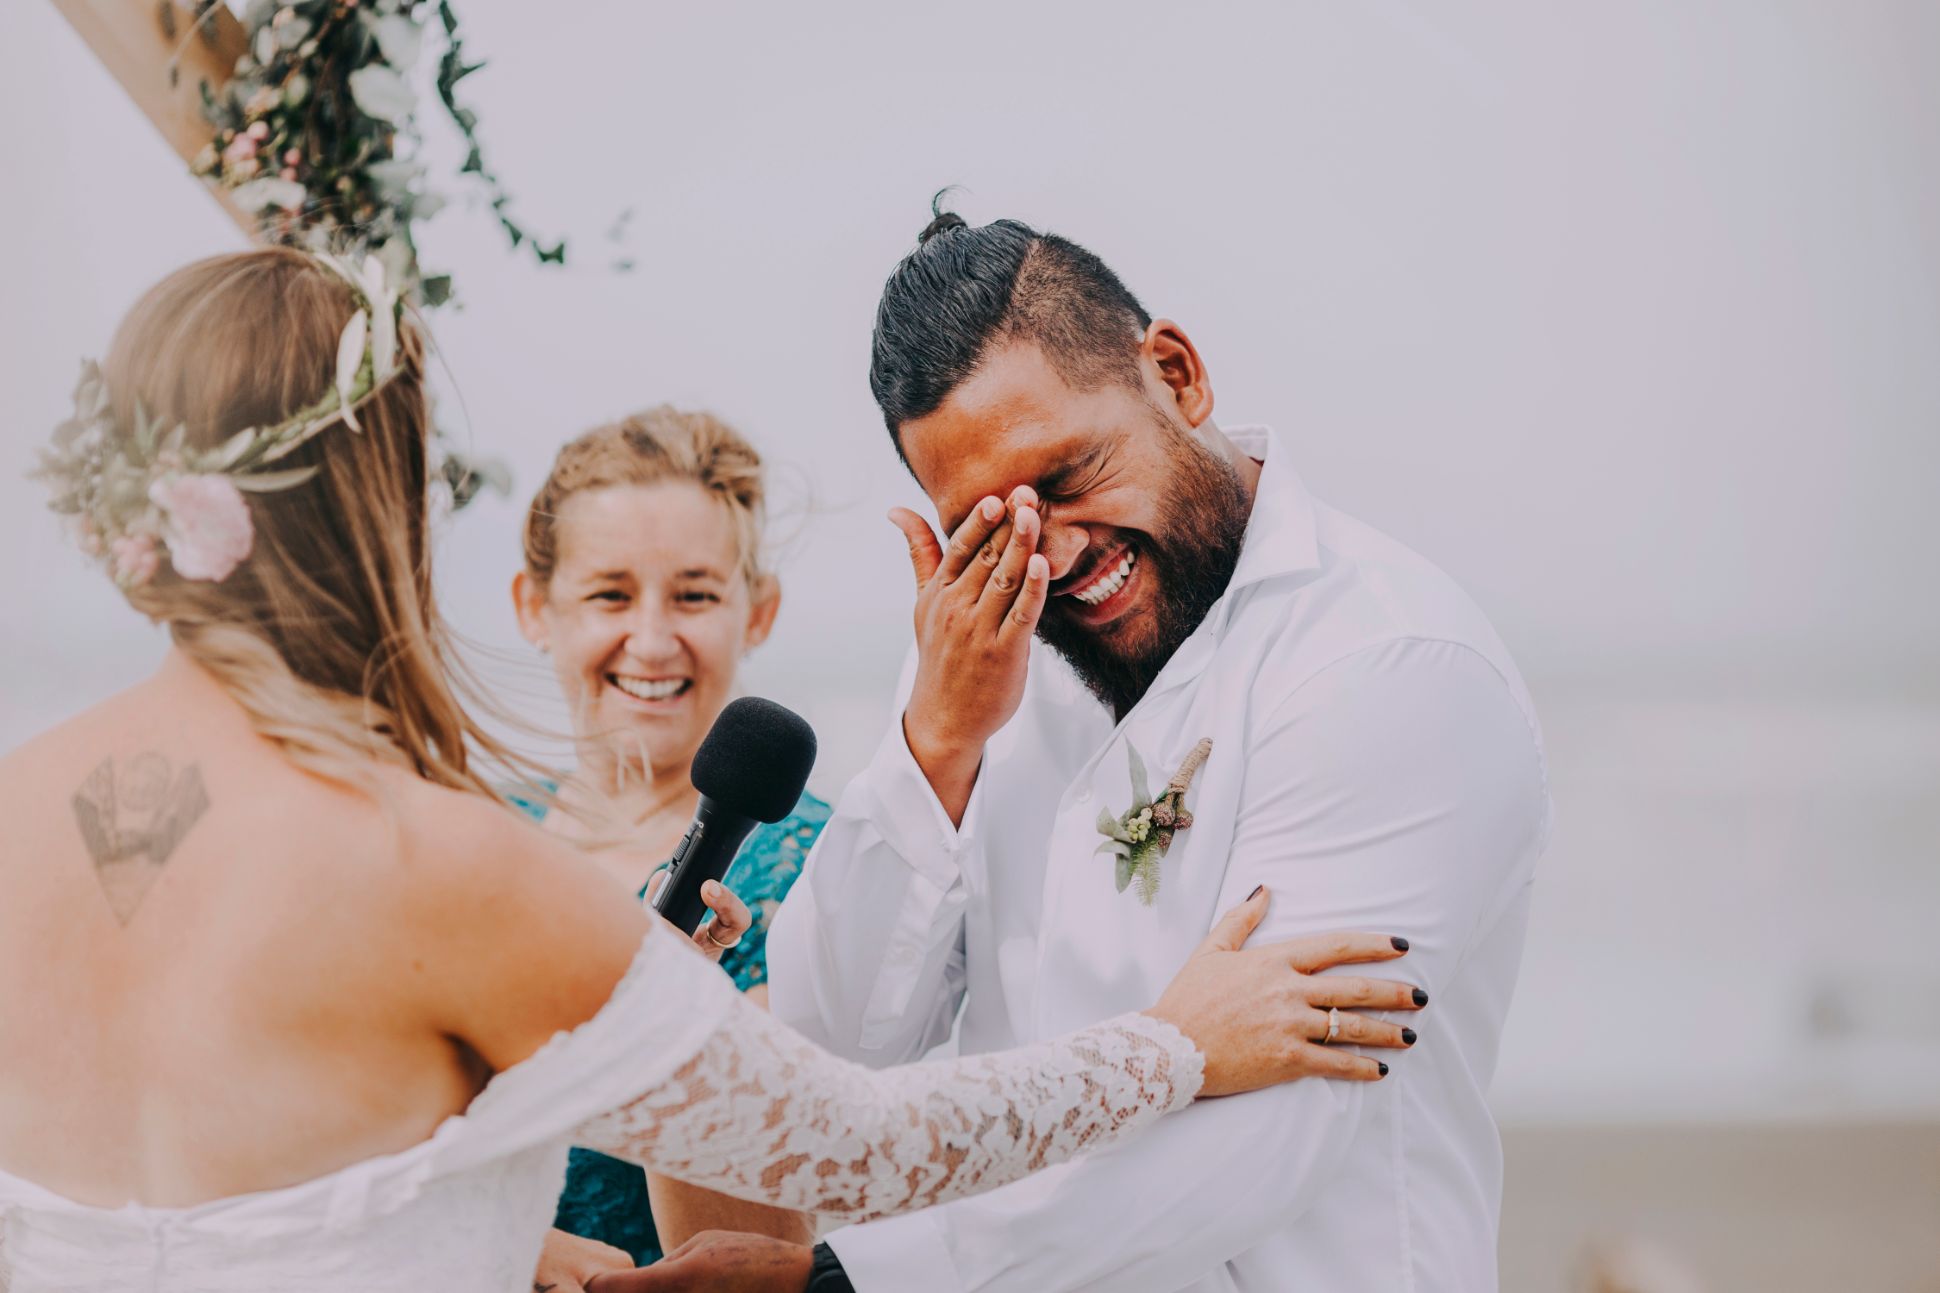 Groom getting emotional as he says his vows to bride